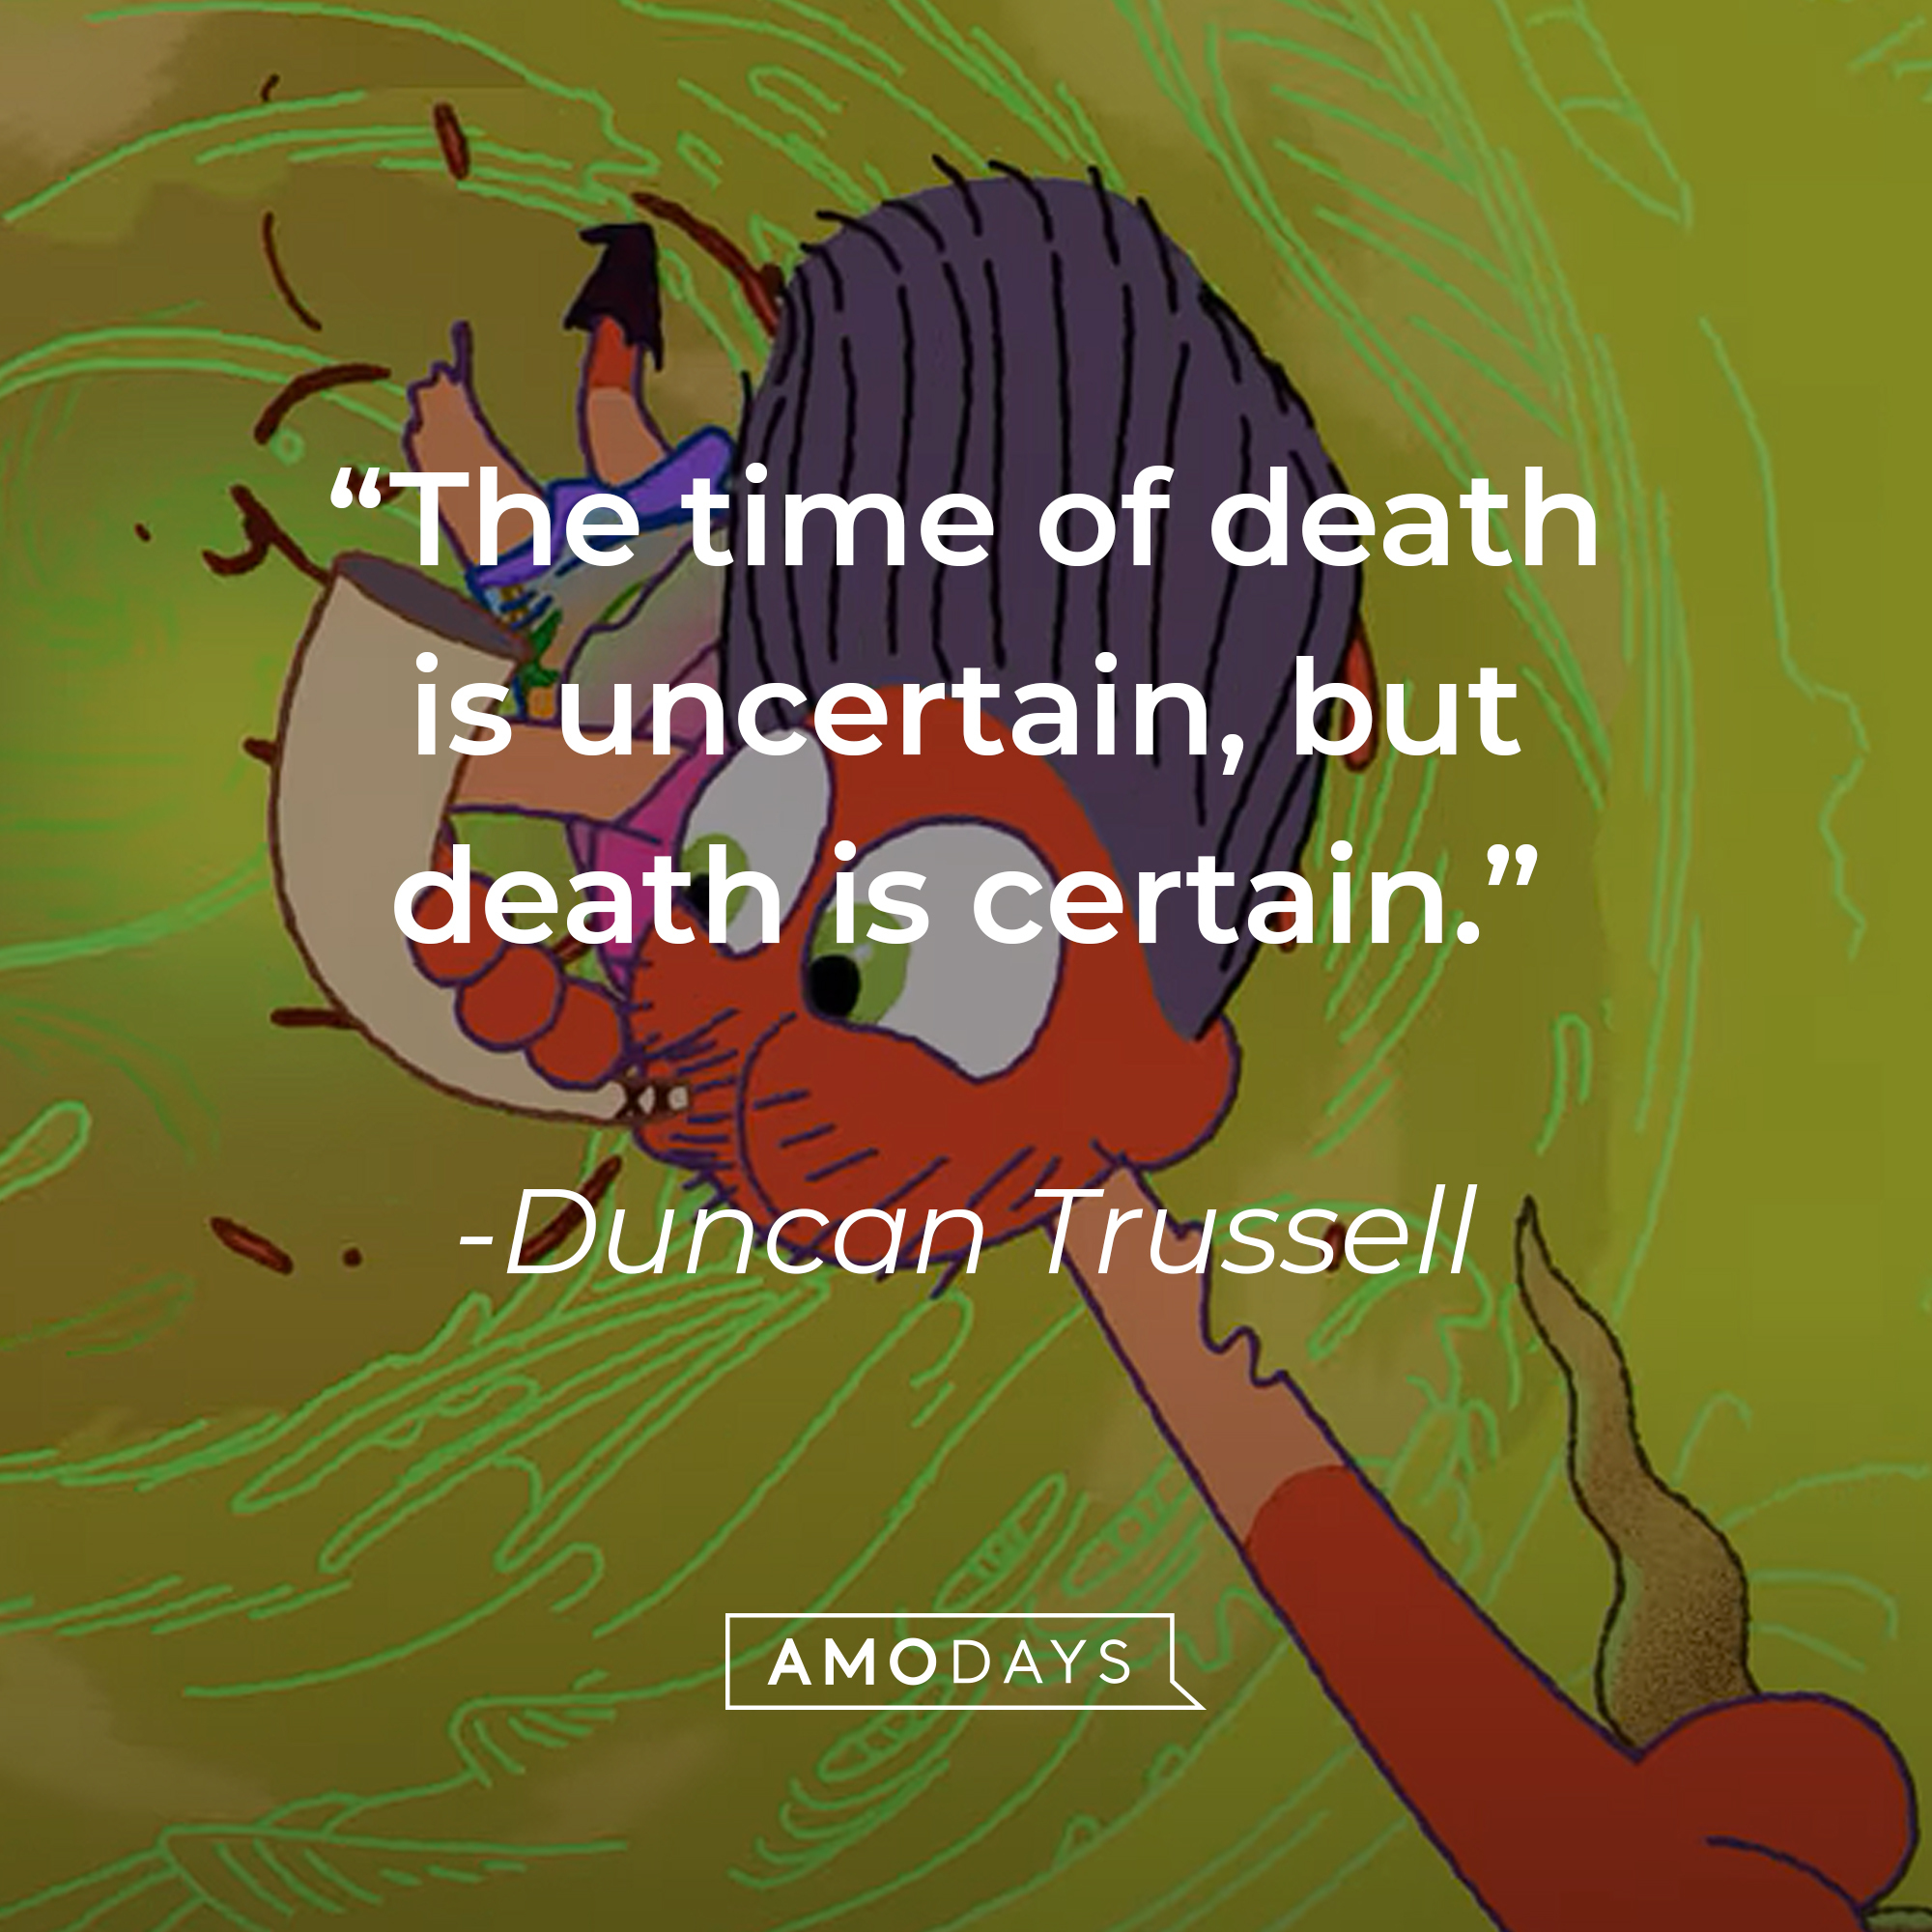 Duncan Trussell's quote: "The time of death is uncertain, but death is certain." | Source: youtube.com/Netflix